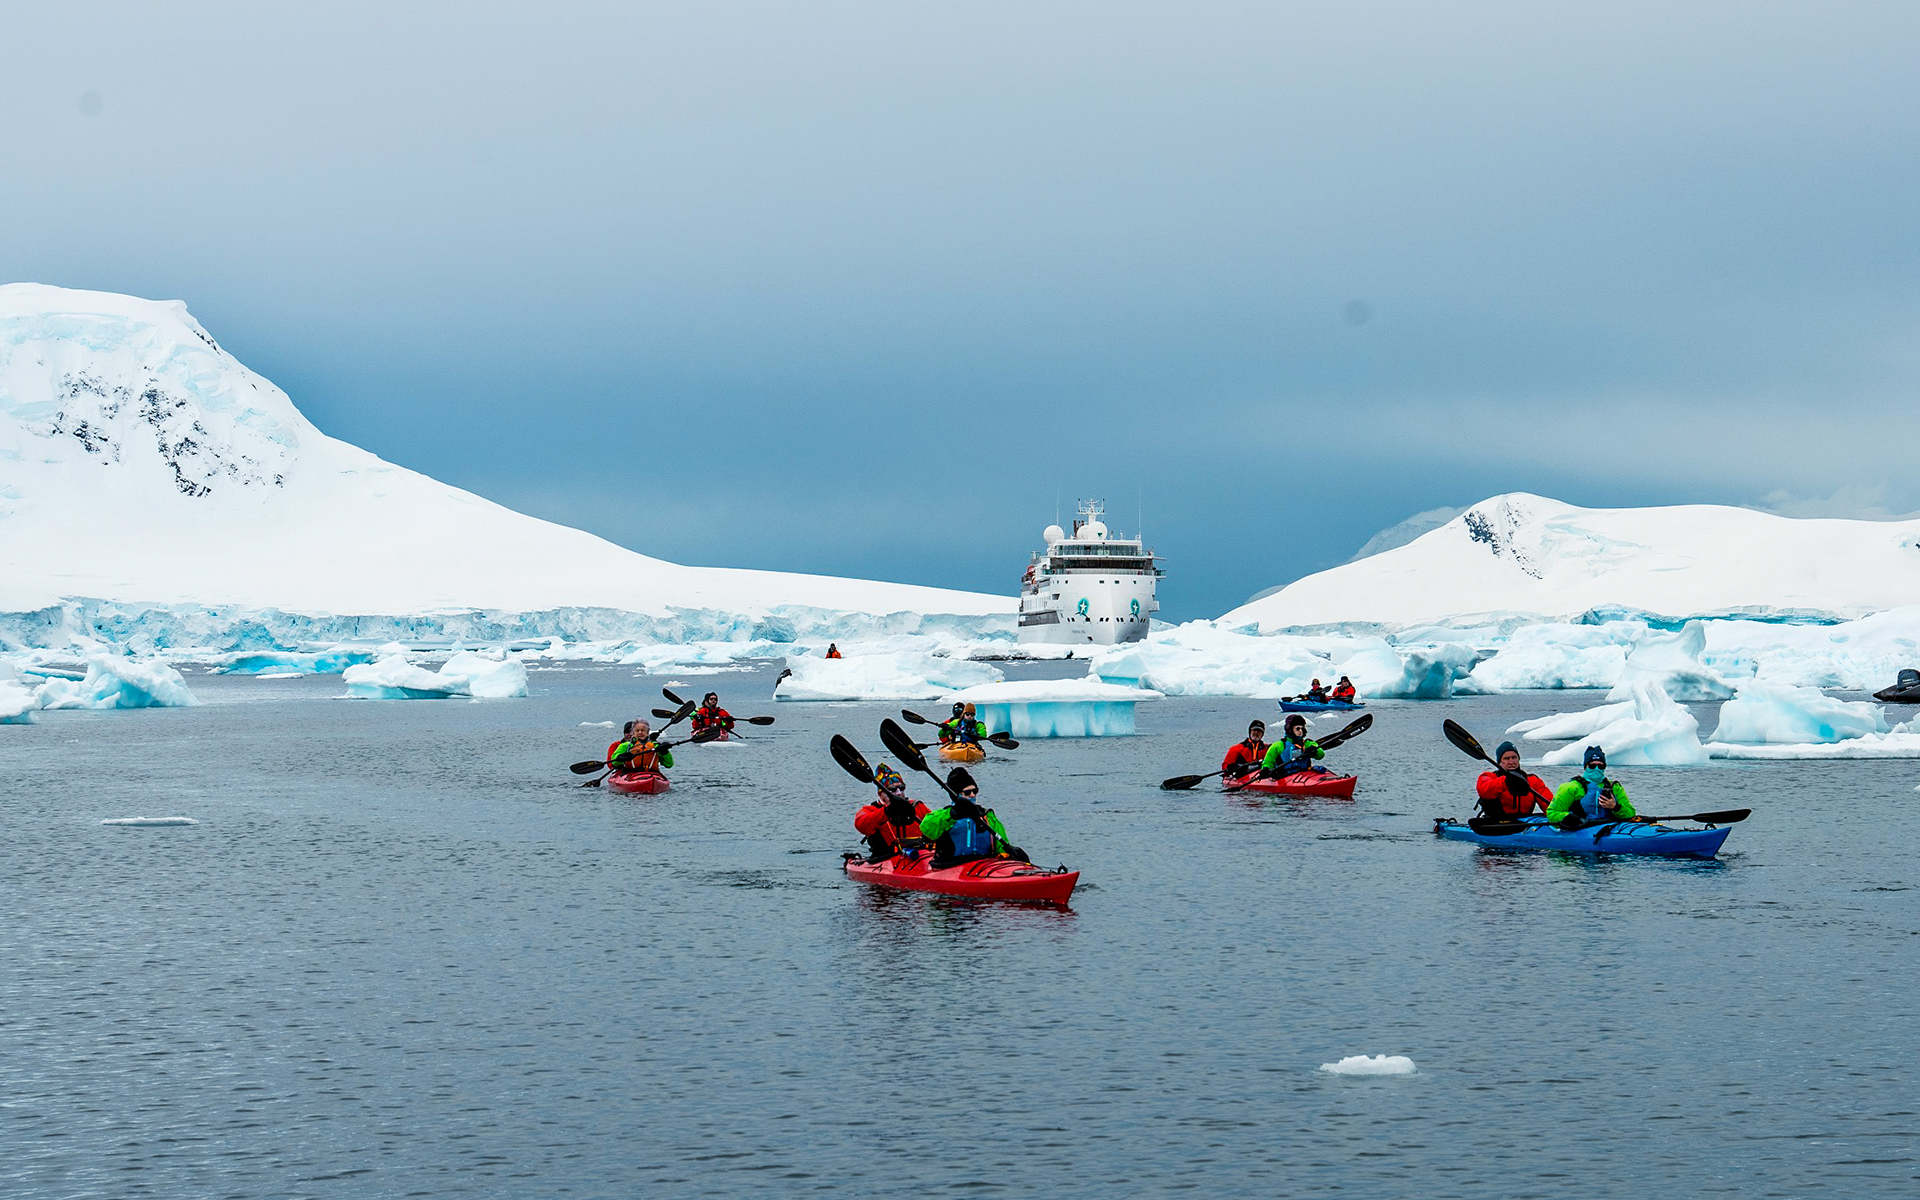 Antarctica travelers paddle brightly colored double kayaks surrounded by snowy mountains, icebergs and Greg Mortimer ship